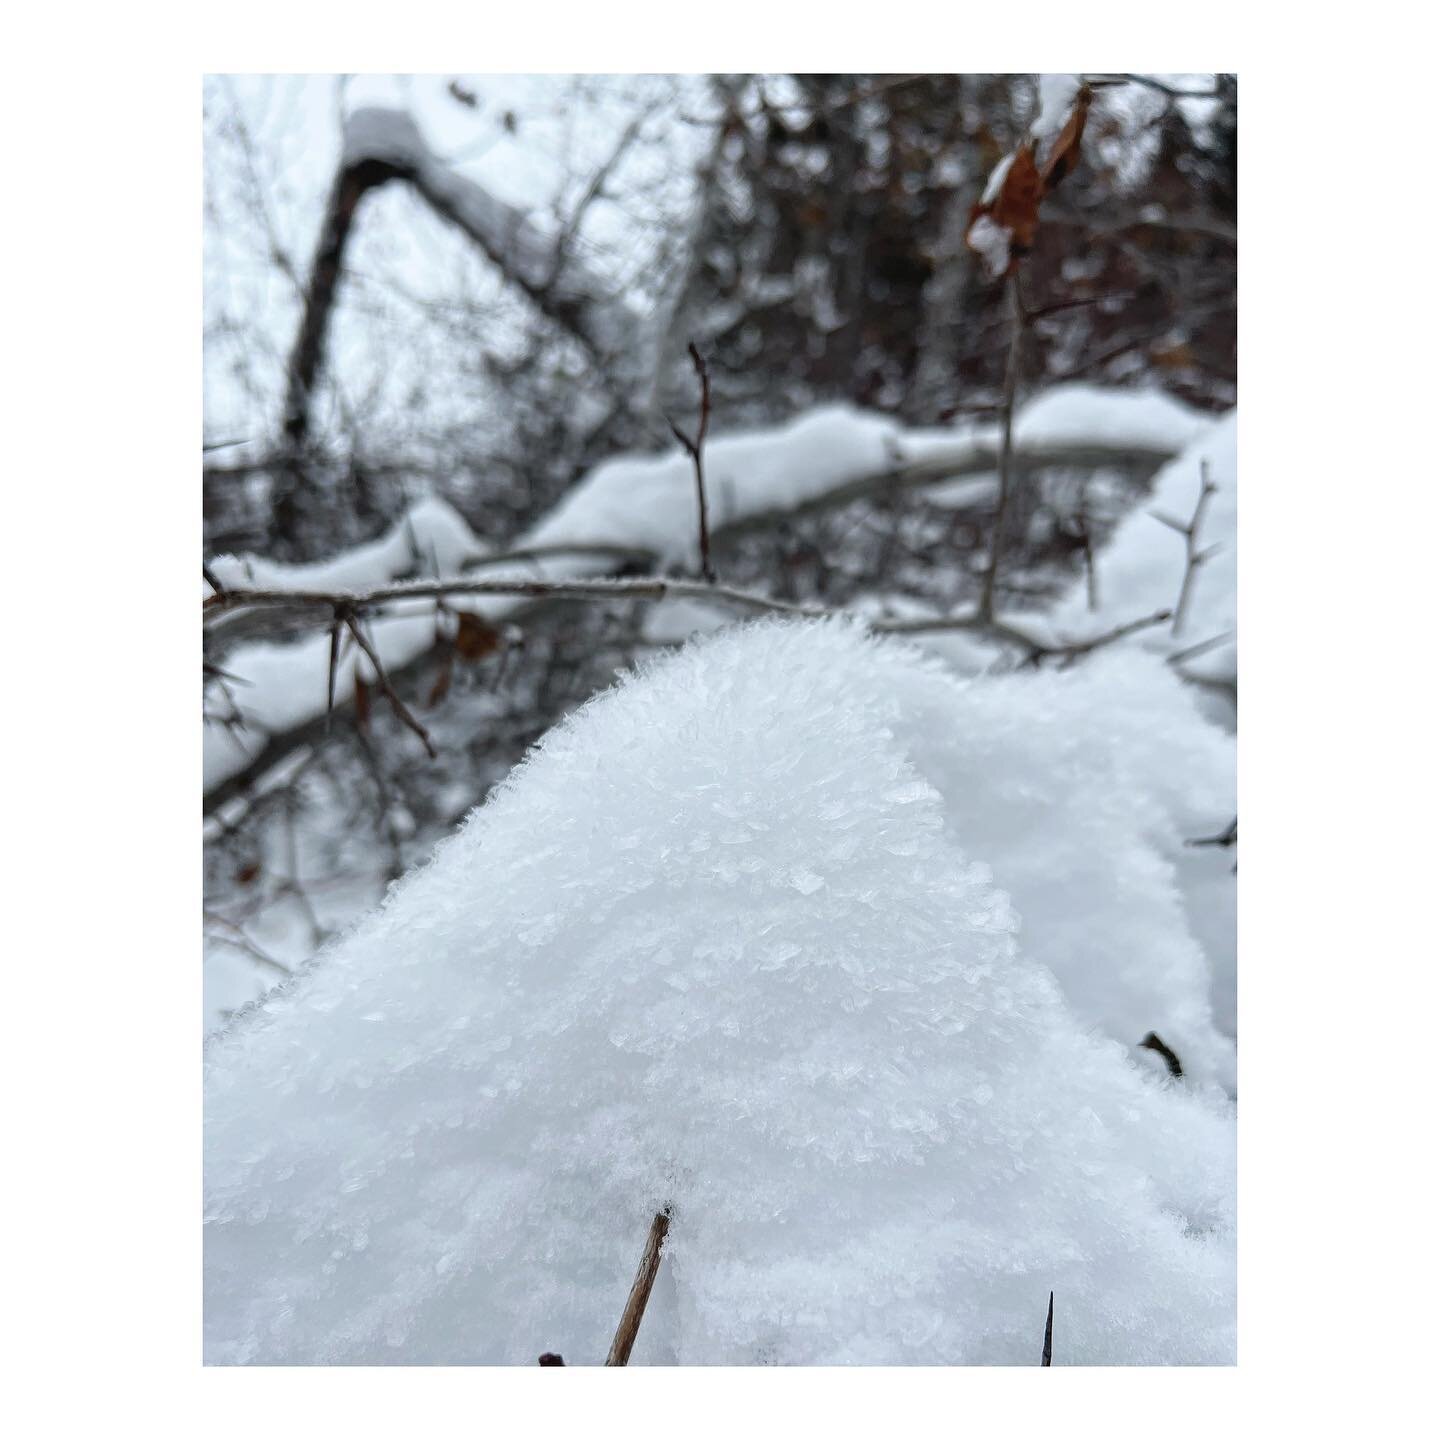 Enchanting ice crystals trail side. It&rsquo;s that time of year; observing the micro spectacle of all the different shapes snow and ice can take. 
.
.
.
#snowscape #icescape #winterlandscape #winterscape #snowcrystals #icecrystals